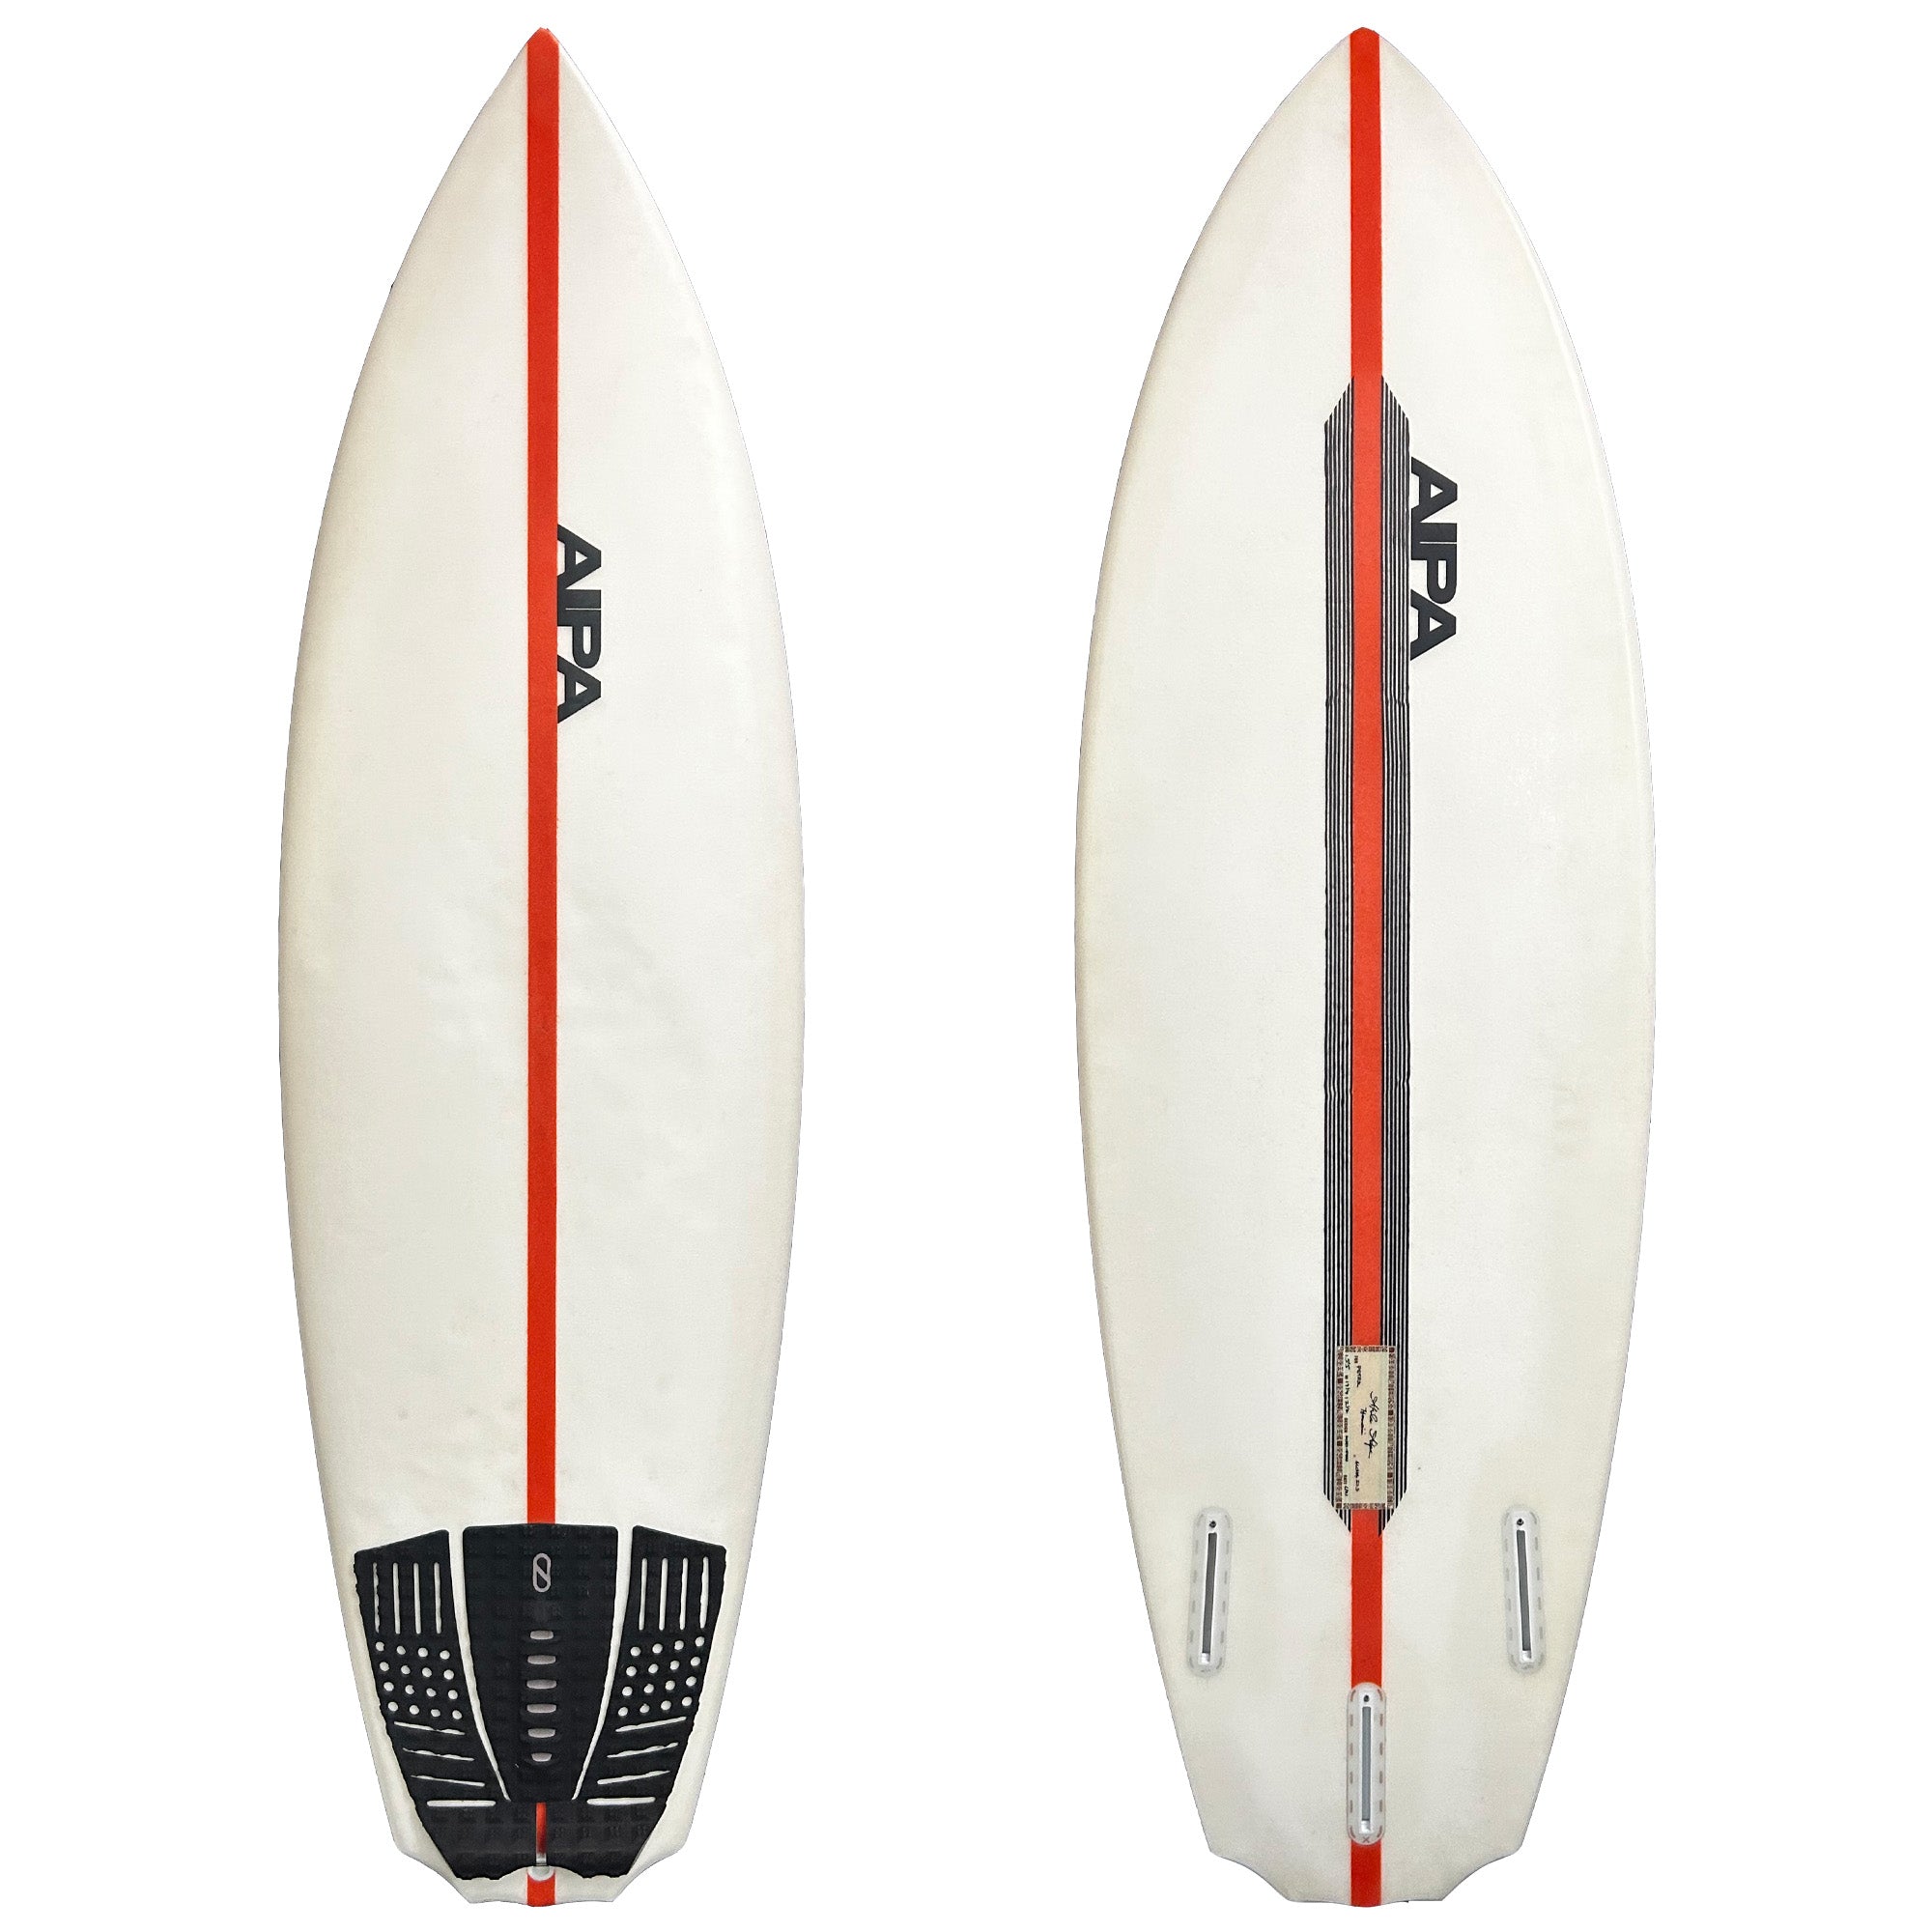 Surf Prescriptions 5'6 Used Surfboard - Surf Station Store